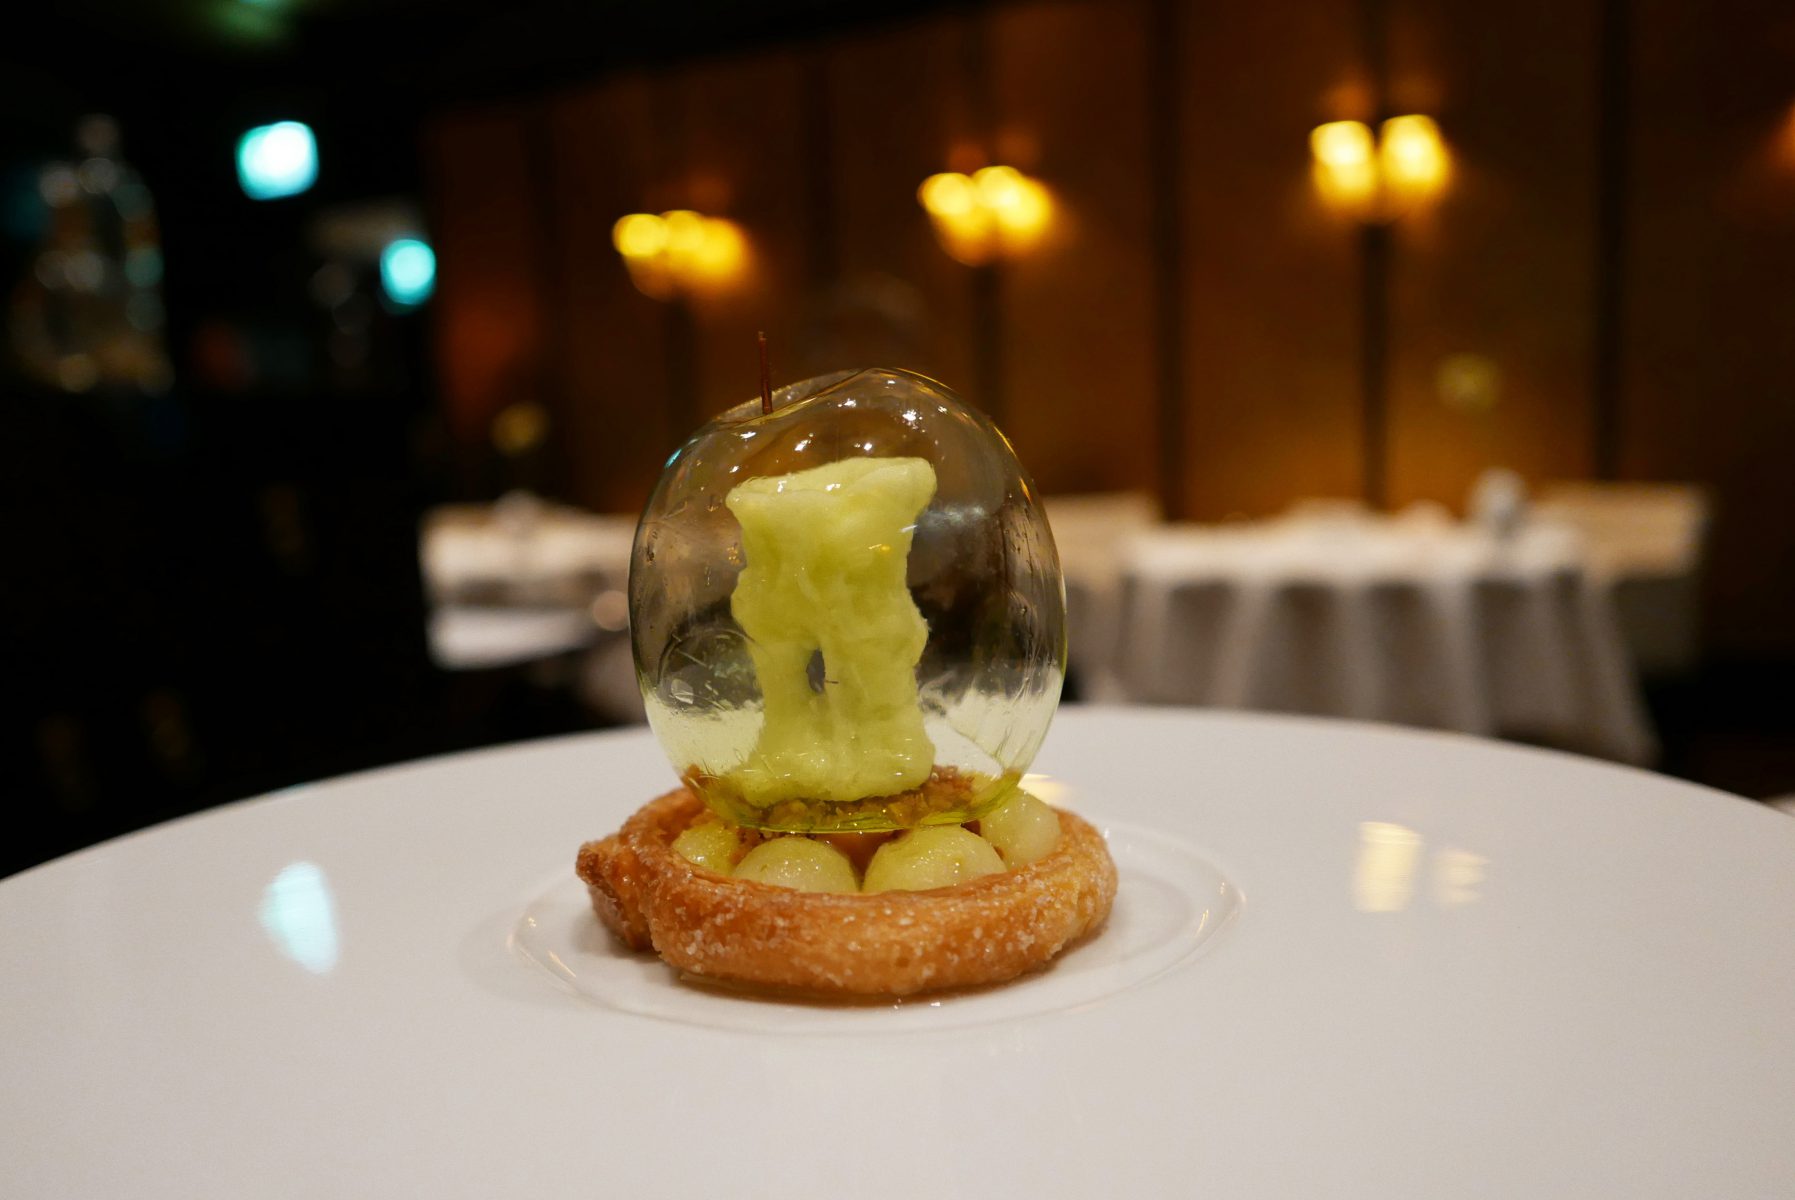 Signature sugar apple with apple sorbet, puff pastry with salted caramel and lemon verbena marinated apples